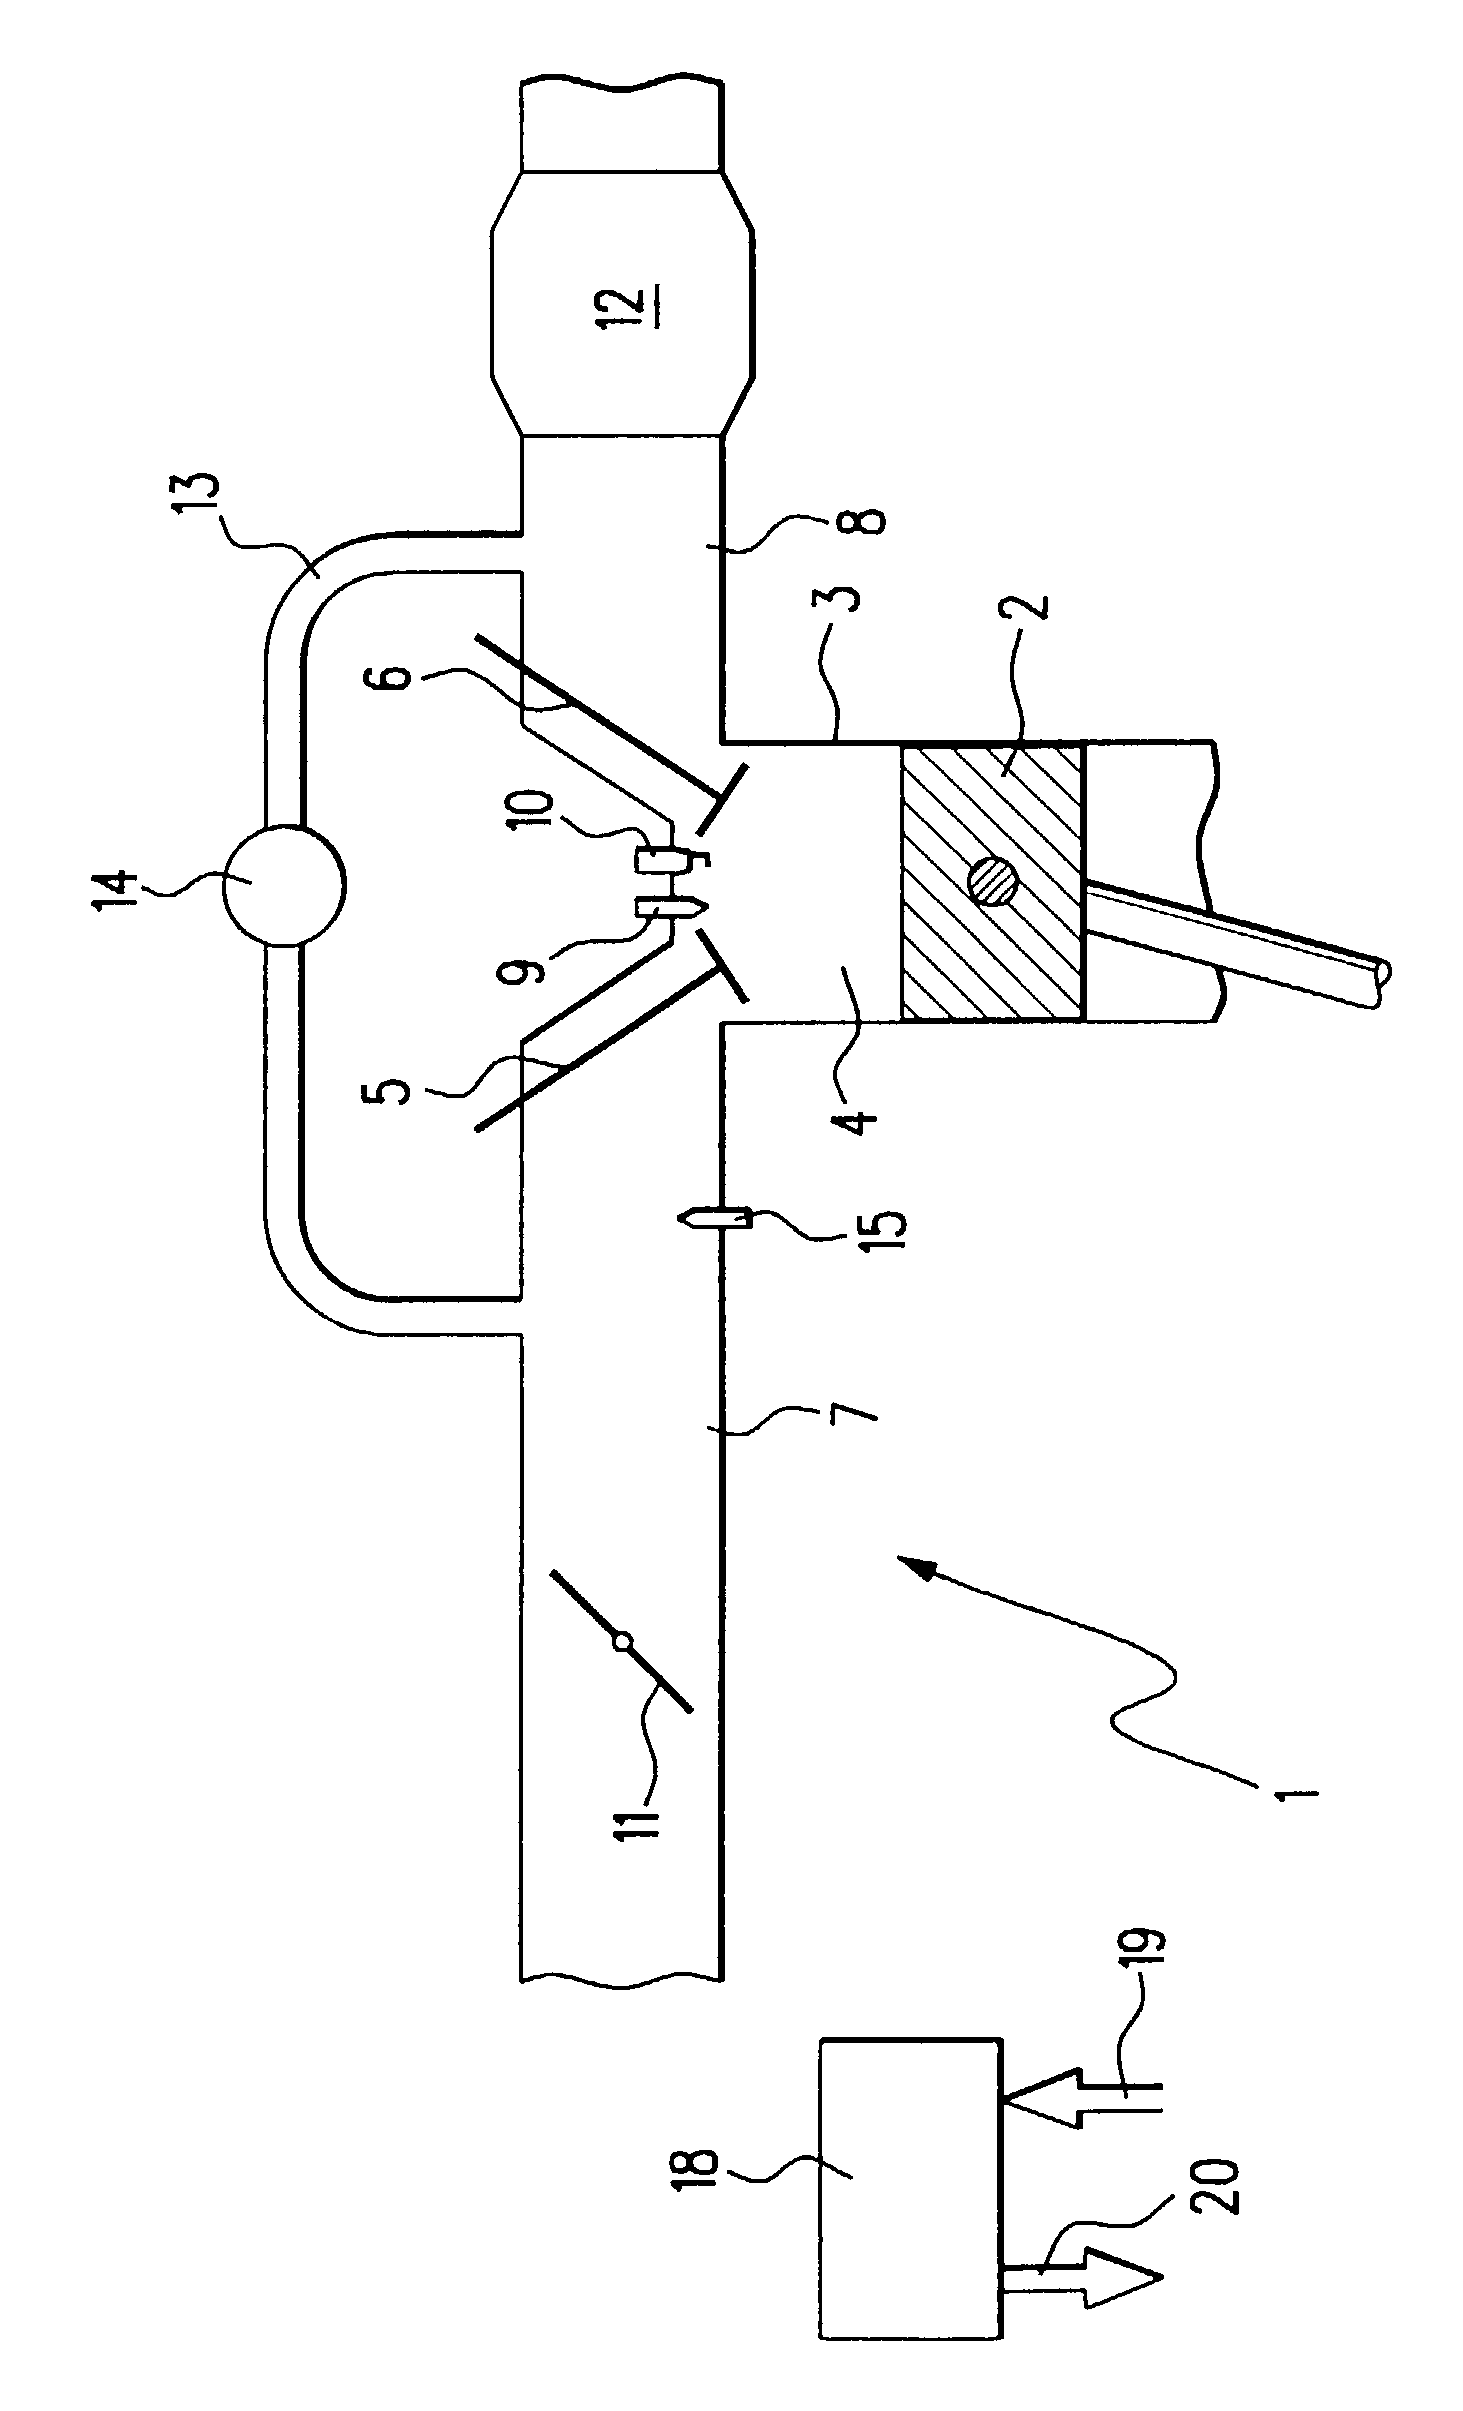 Fuel injection system for internal combustion engines with gasoline direct injection, which includes optional injection into the intake tube, and method for operating it